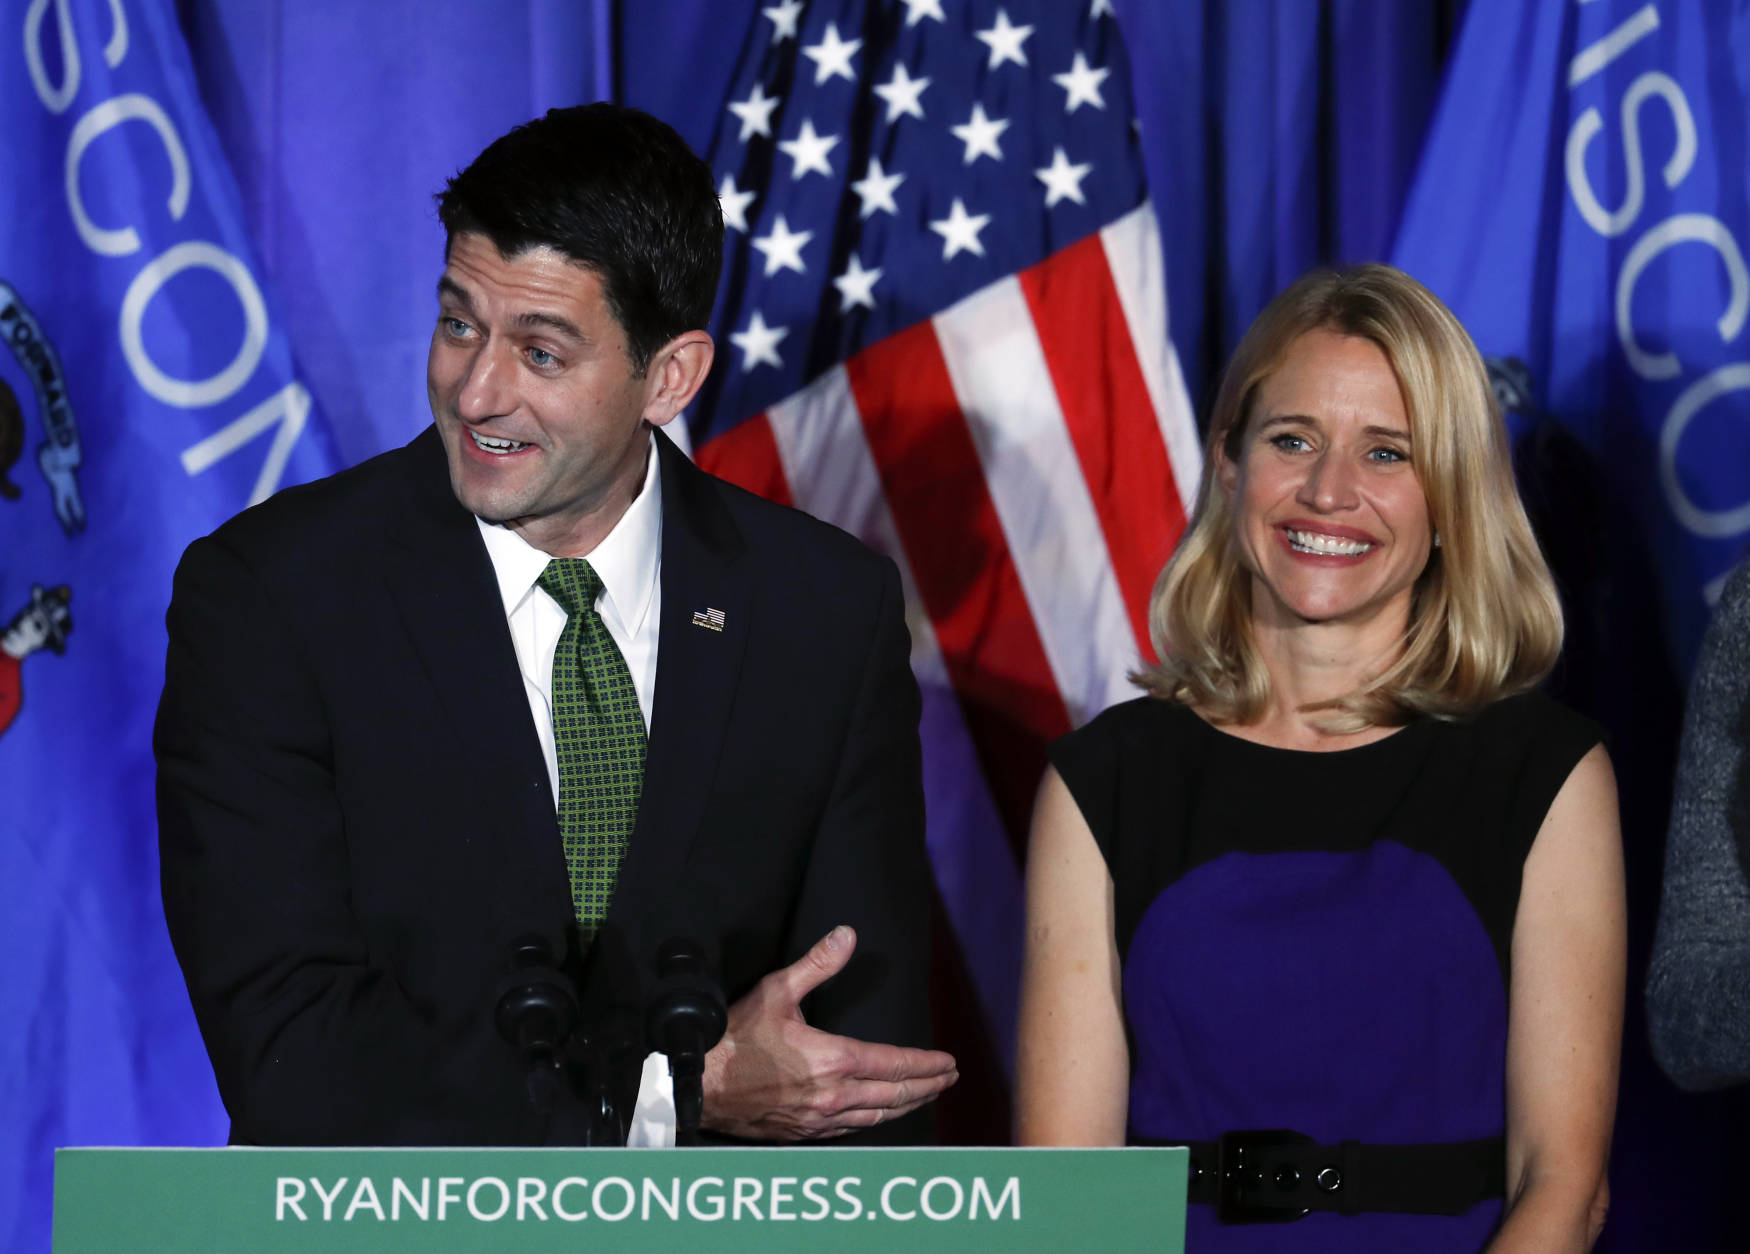 House Speaker Paul Ryan of Wisconsin smiles with his wife Janna at a campaign rally in Janesville, Wis., Tuesday, Nov. 8, 2016. (AP Photo/Paul Sancya)